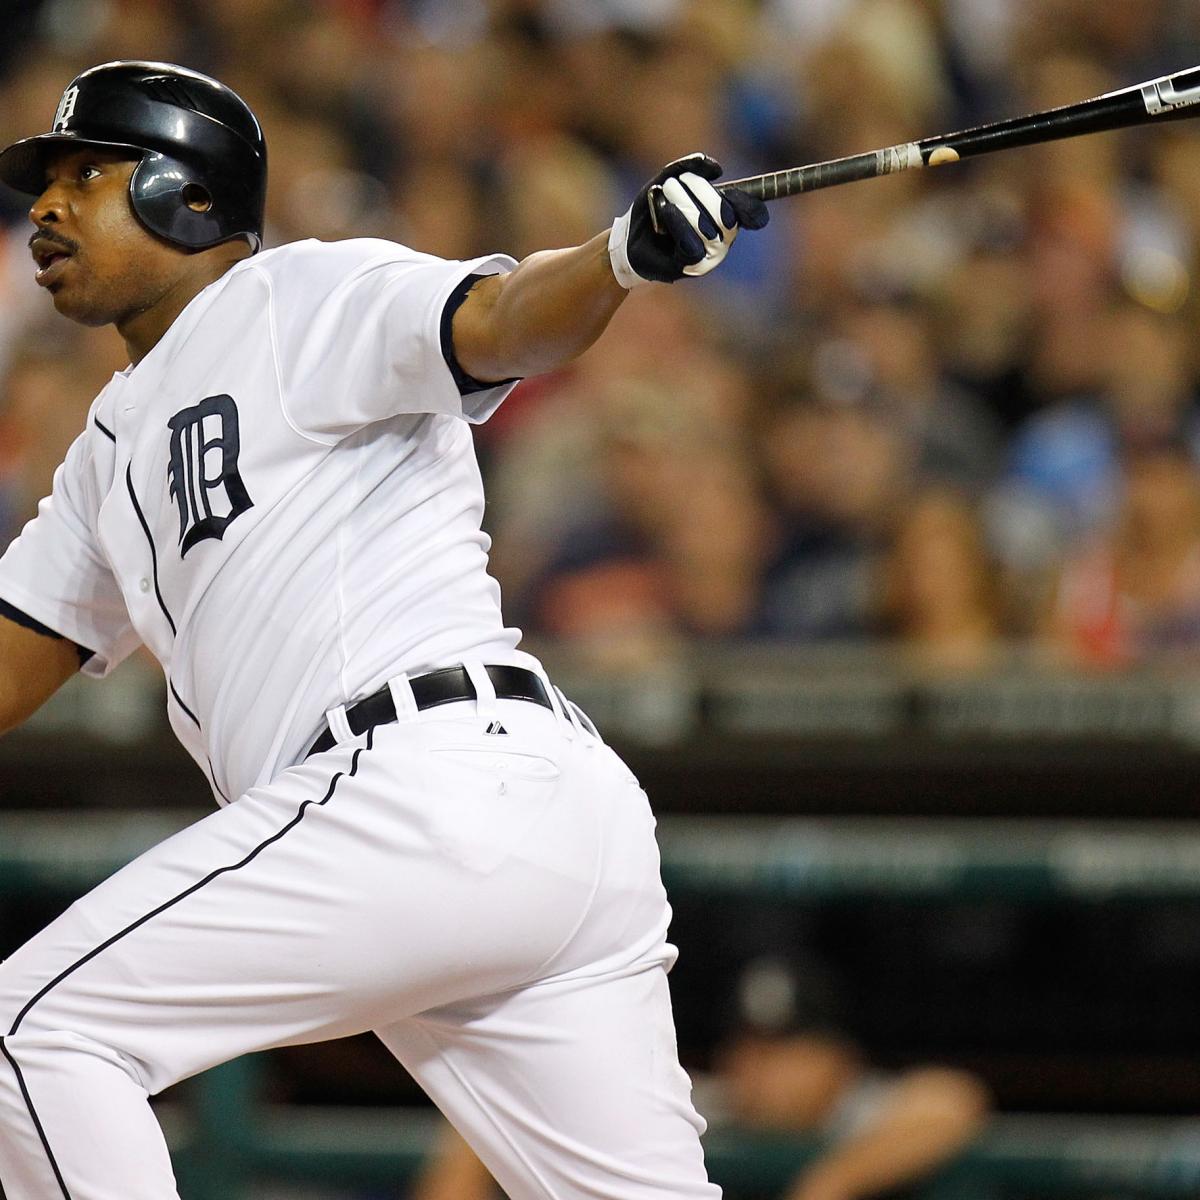 Swisher HR sinks Tigers; White Sox prevail in 14 innings